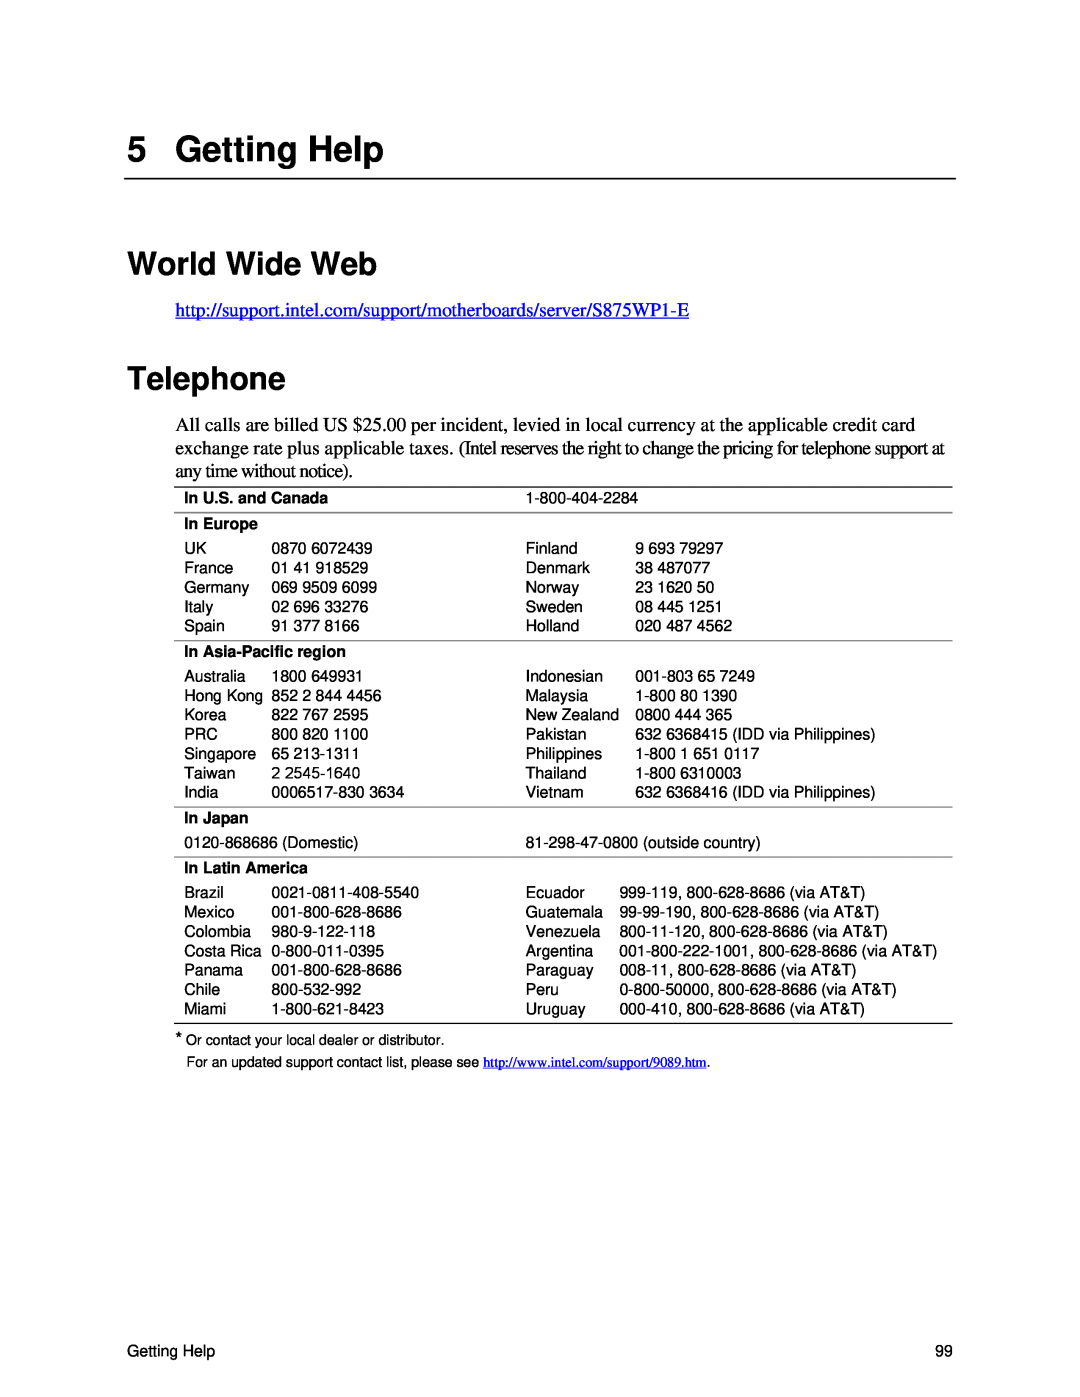 Intel manual Getting Help, World Wide Web, Telephone, http//support.intel.com/support/motherboards/server/S875WP1-E 